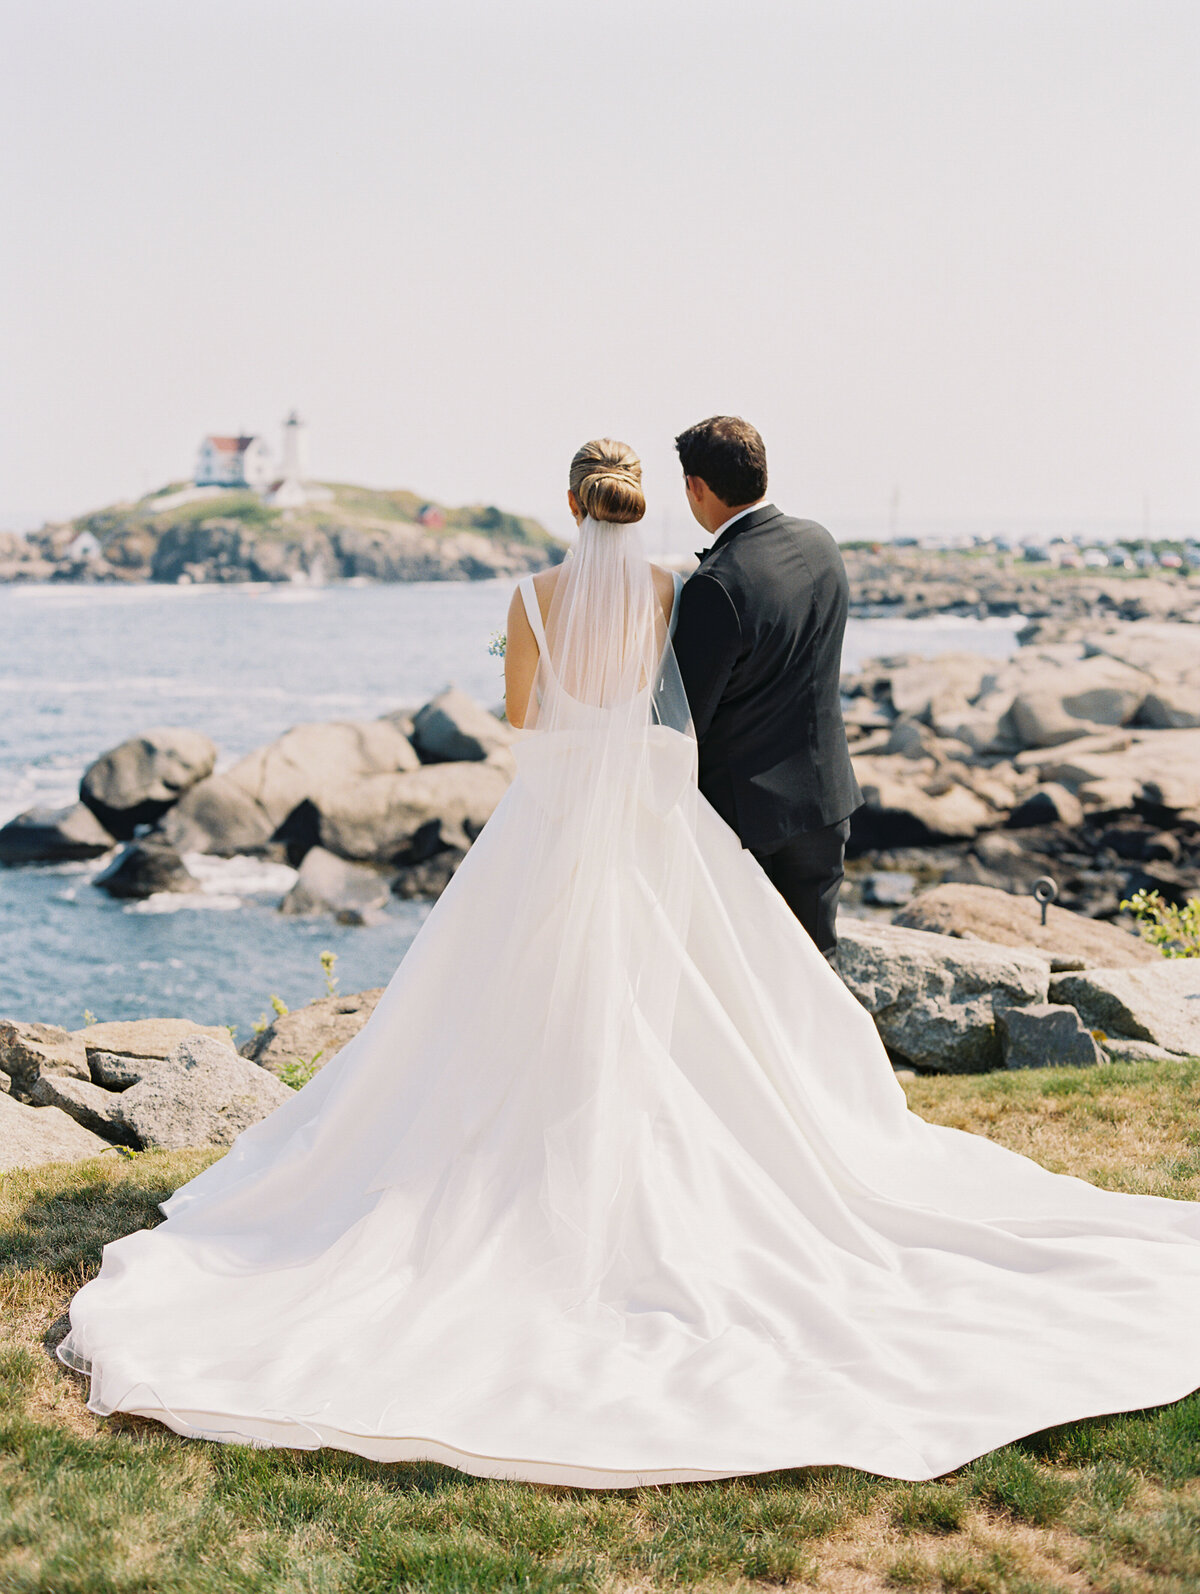 Ocean side wedding at The ViewPoint Hotel in York, Maine.